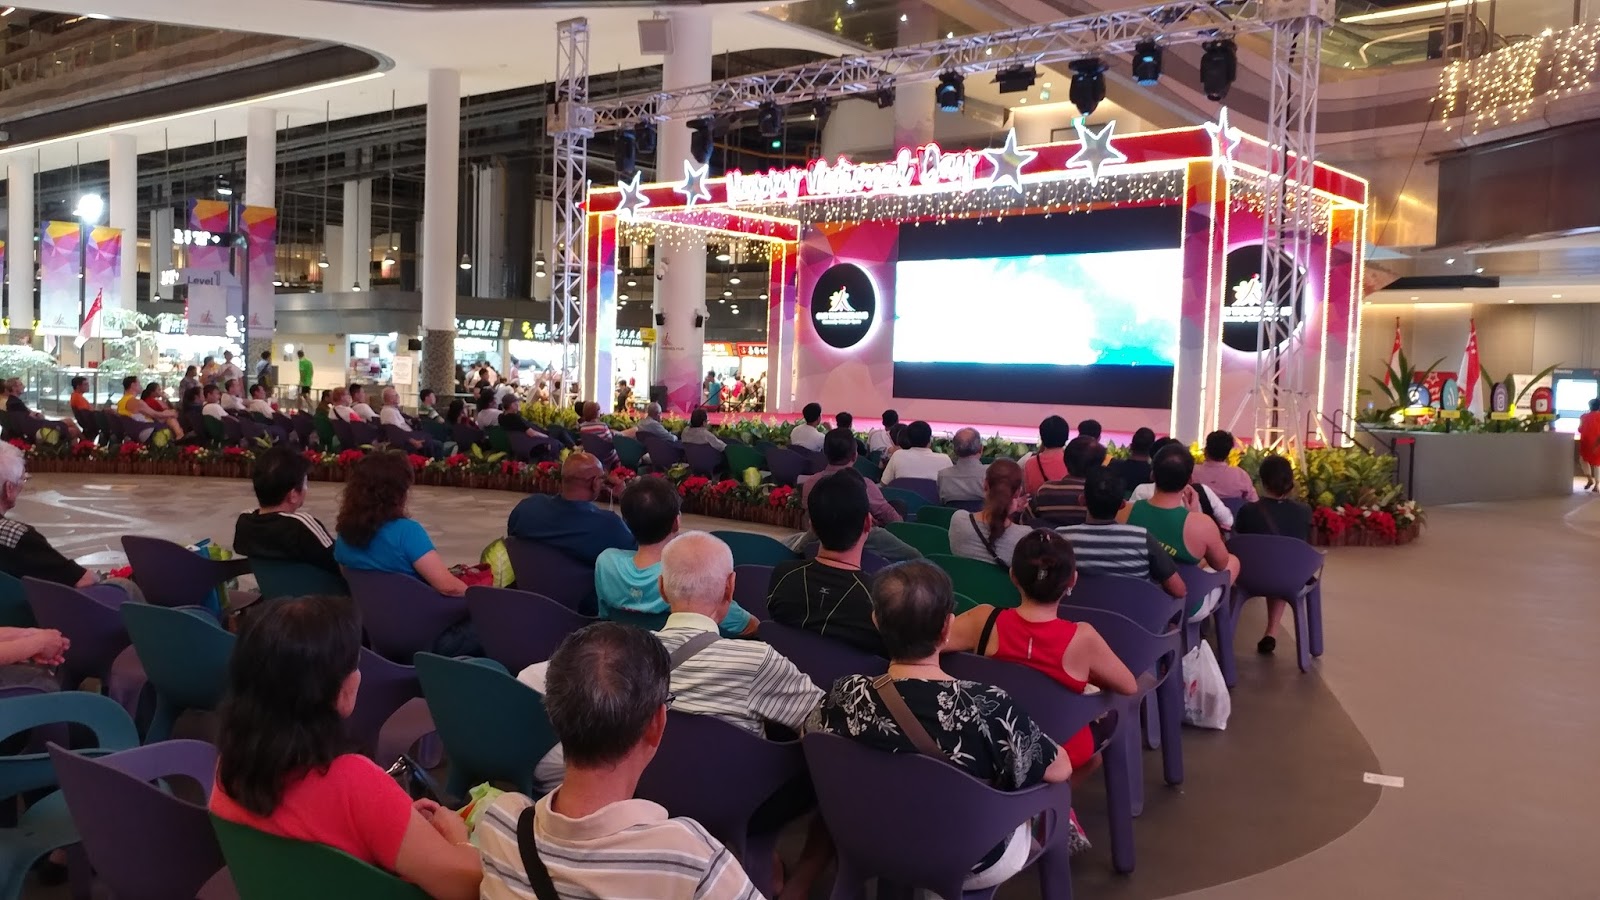 Watch movie for free at OUR TAMPINES HUB in SG